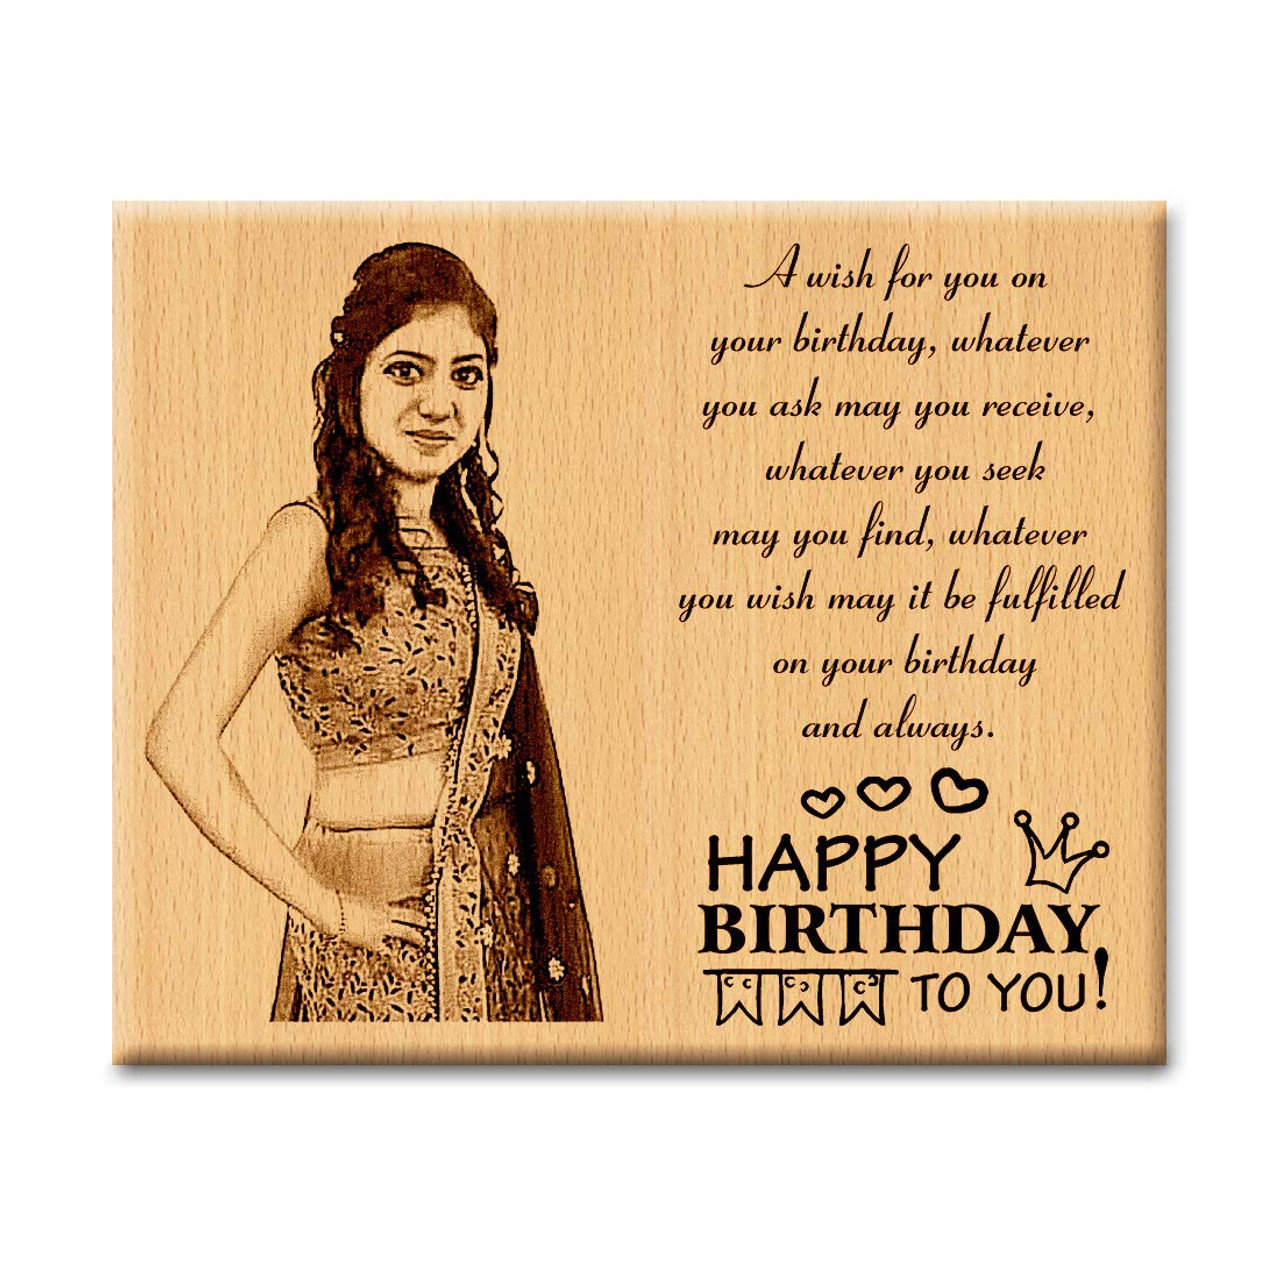 Incredible Gifts India Teachers Day Gift for Sir by Students - Personalized  Engraved Wooden Momentos (5 X 4 inches, Wood, Beige)Rectangular, Tabletop :  Amazon.in: Home & Kitchen